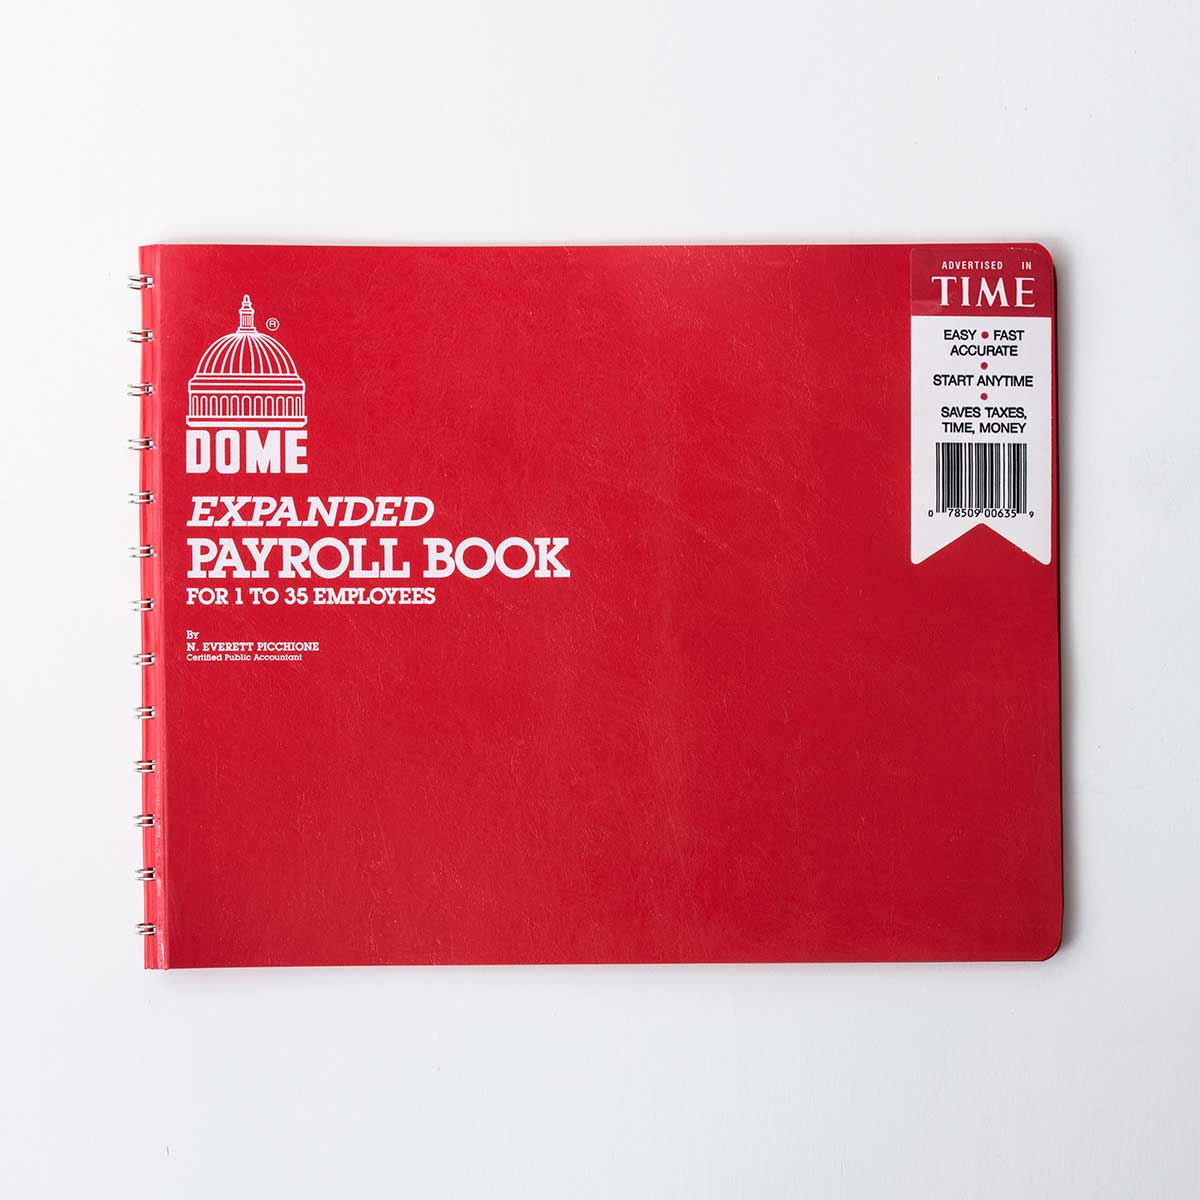 Dome Expanded Payroll Book The Dome Company